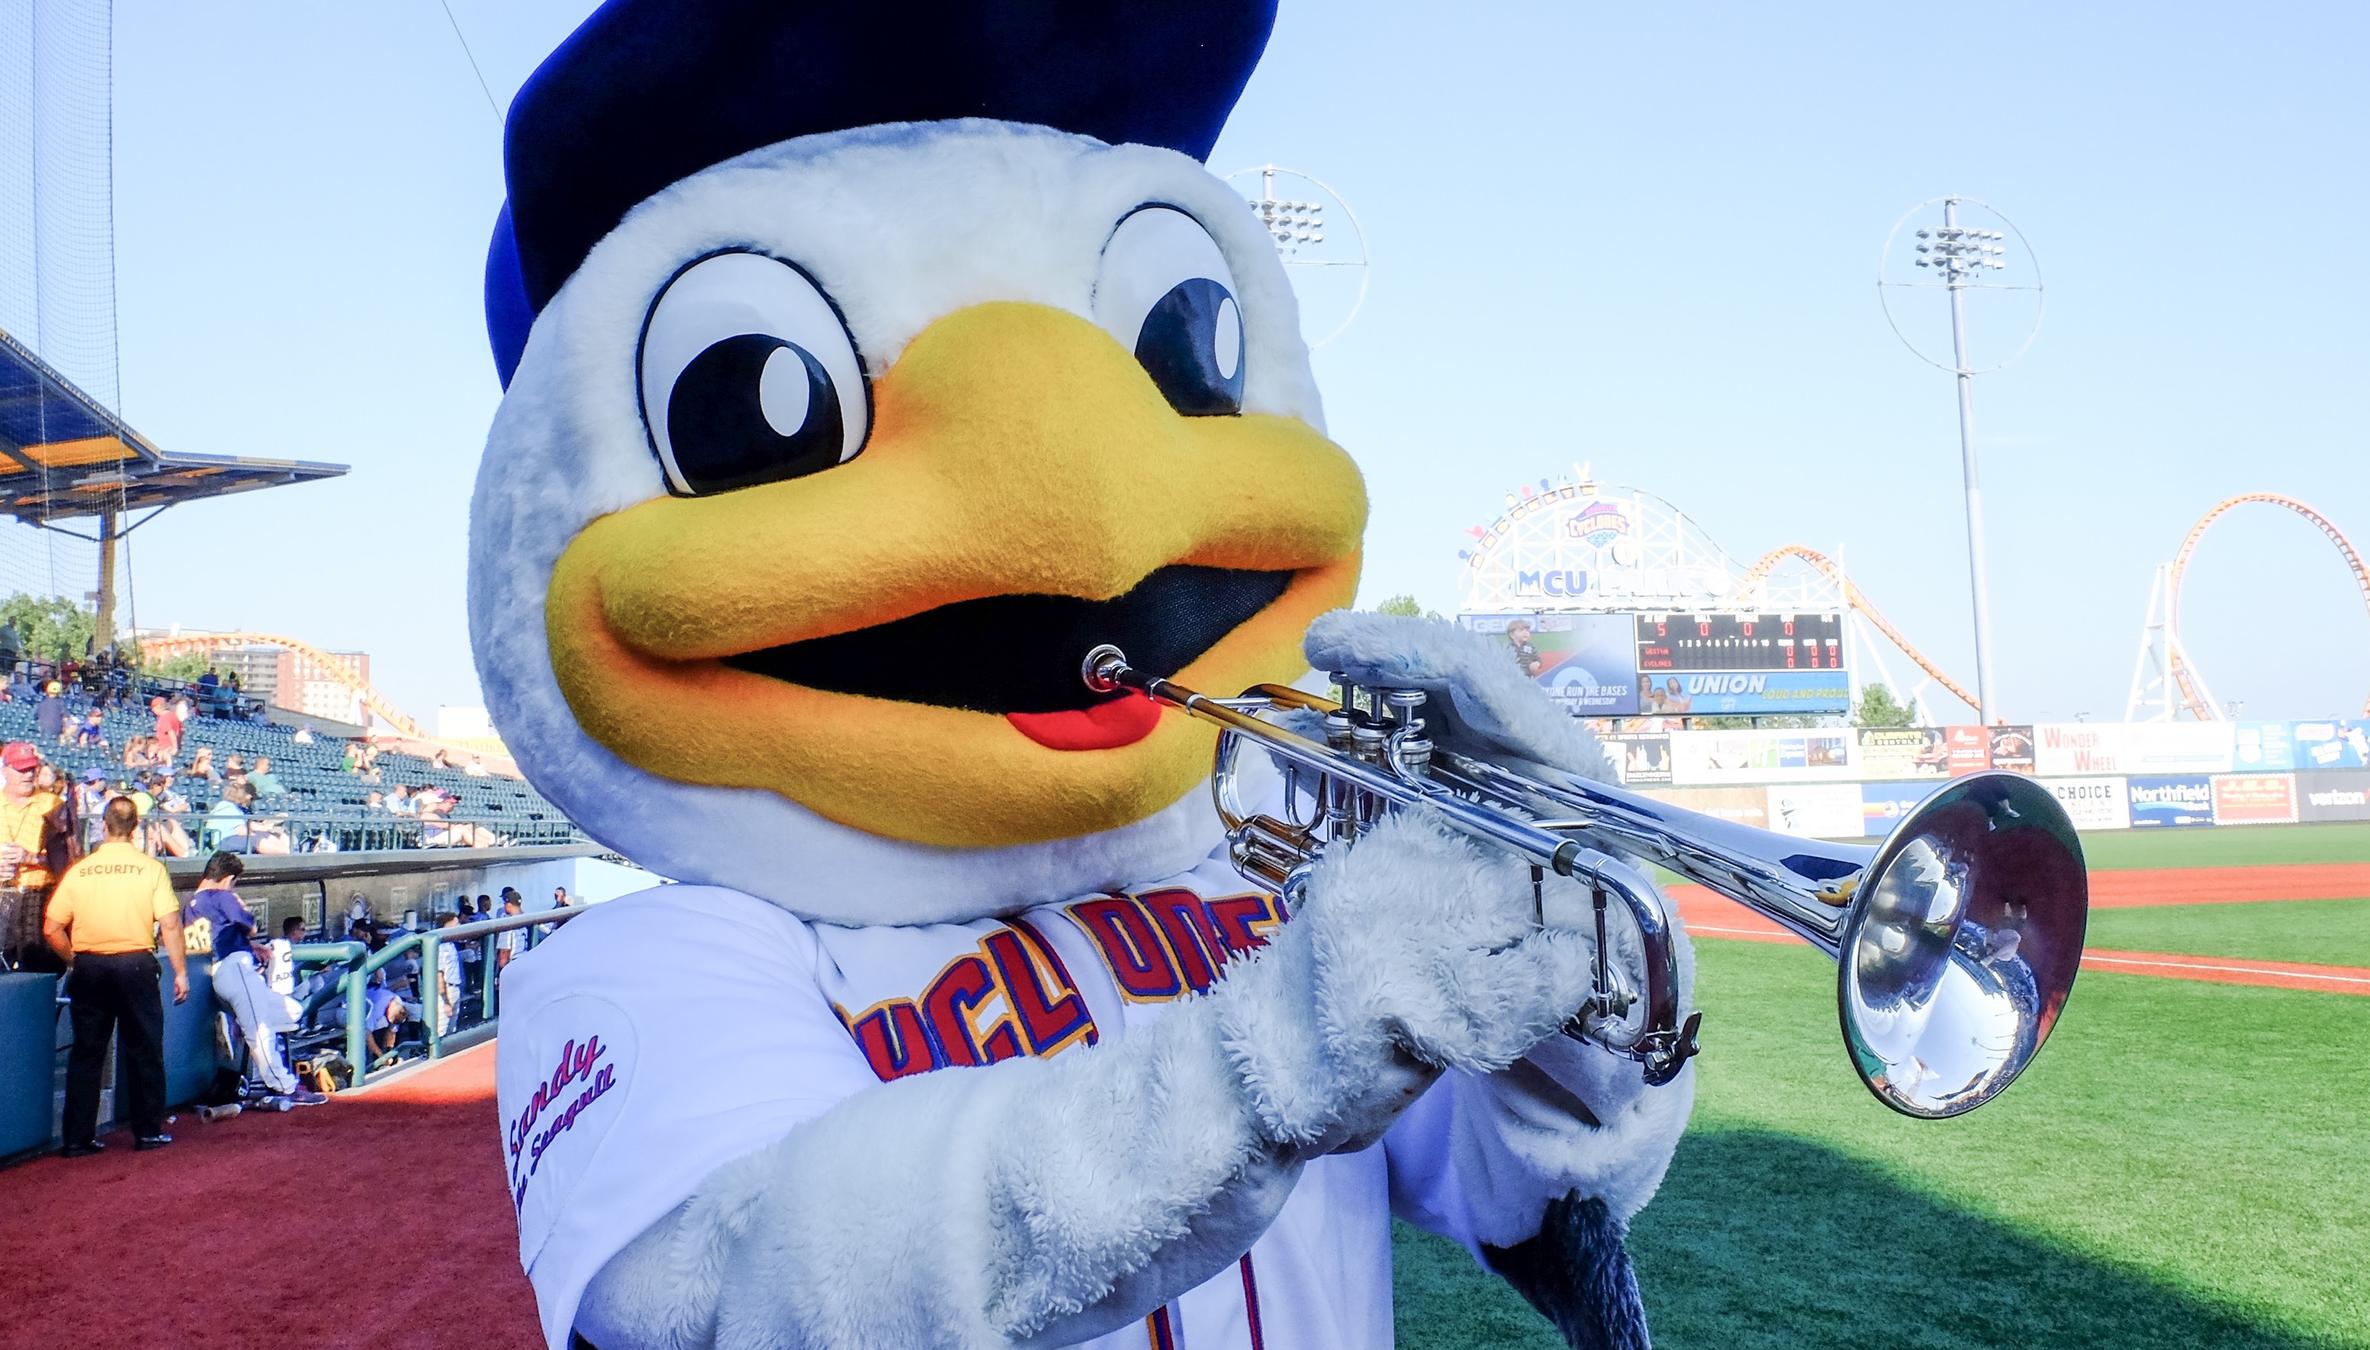 Brooklyn Cyclones mascot Sandy the Seagull in dugout before game